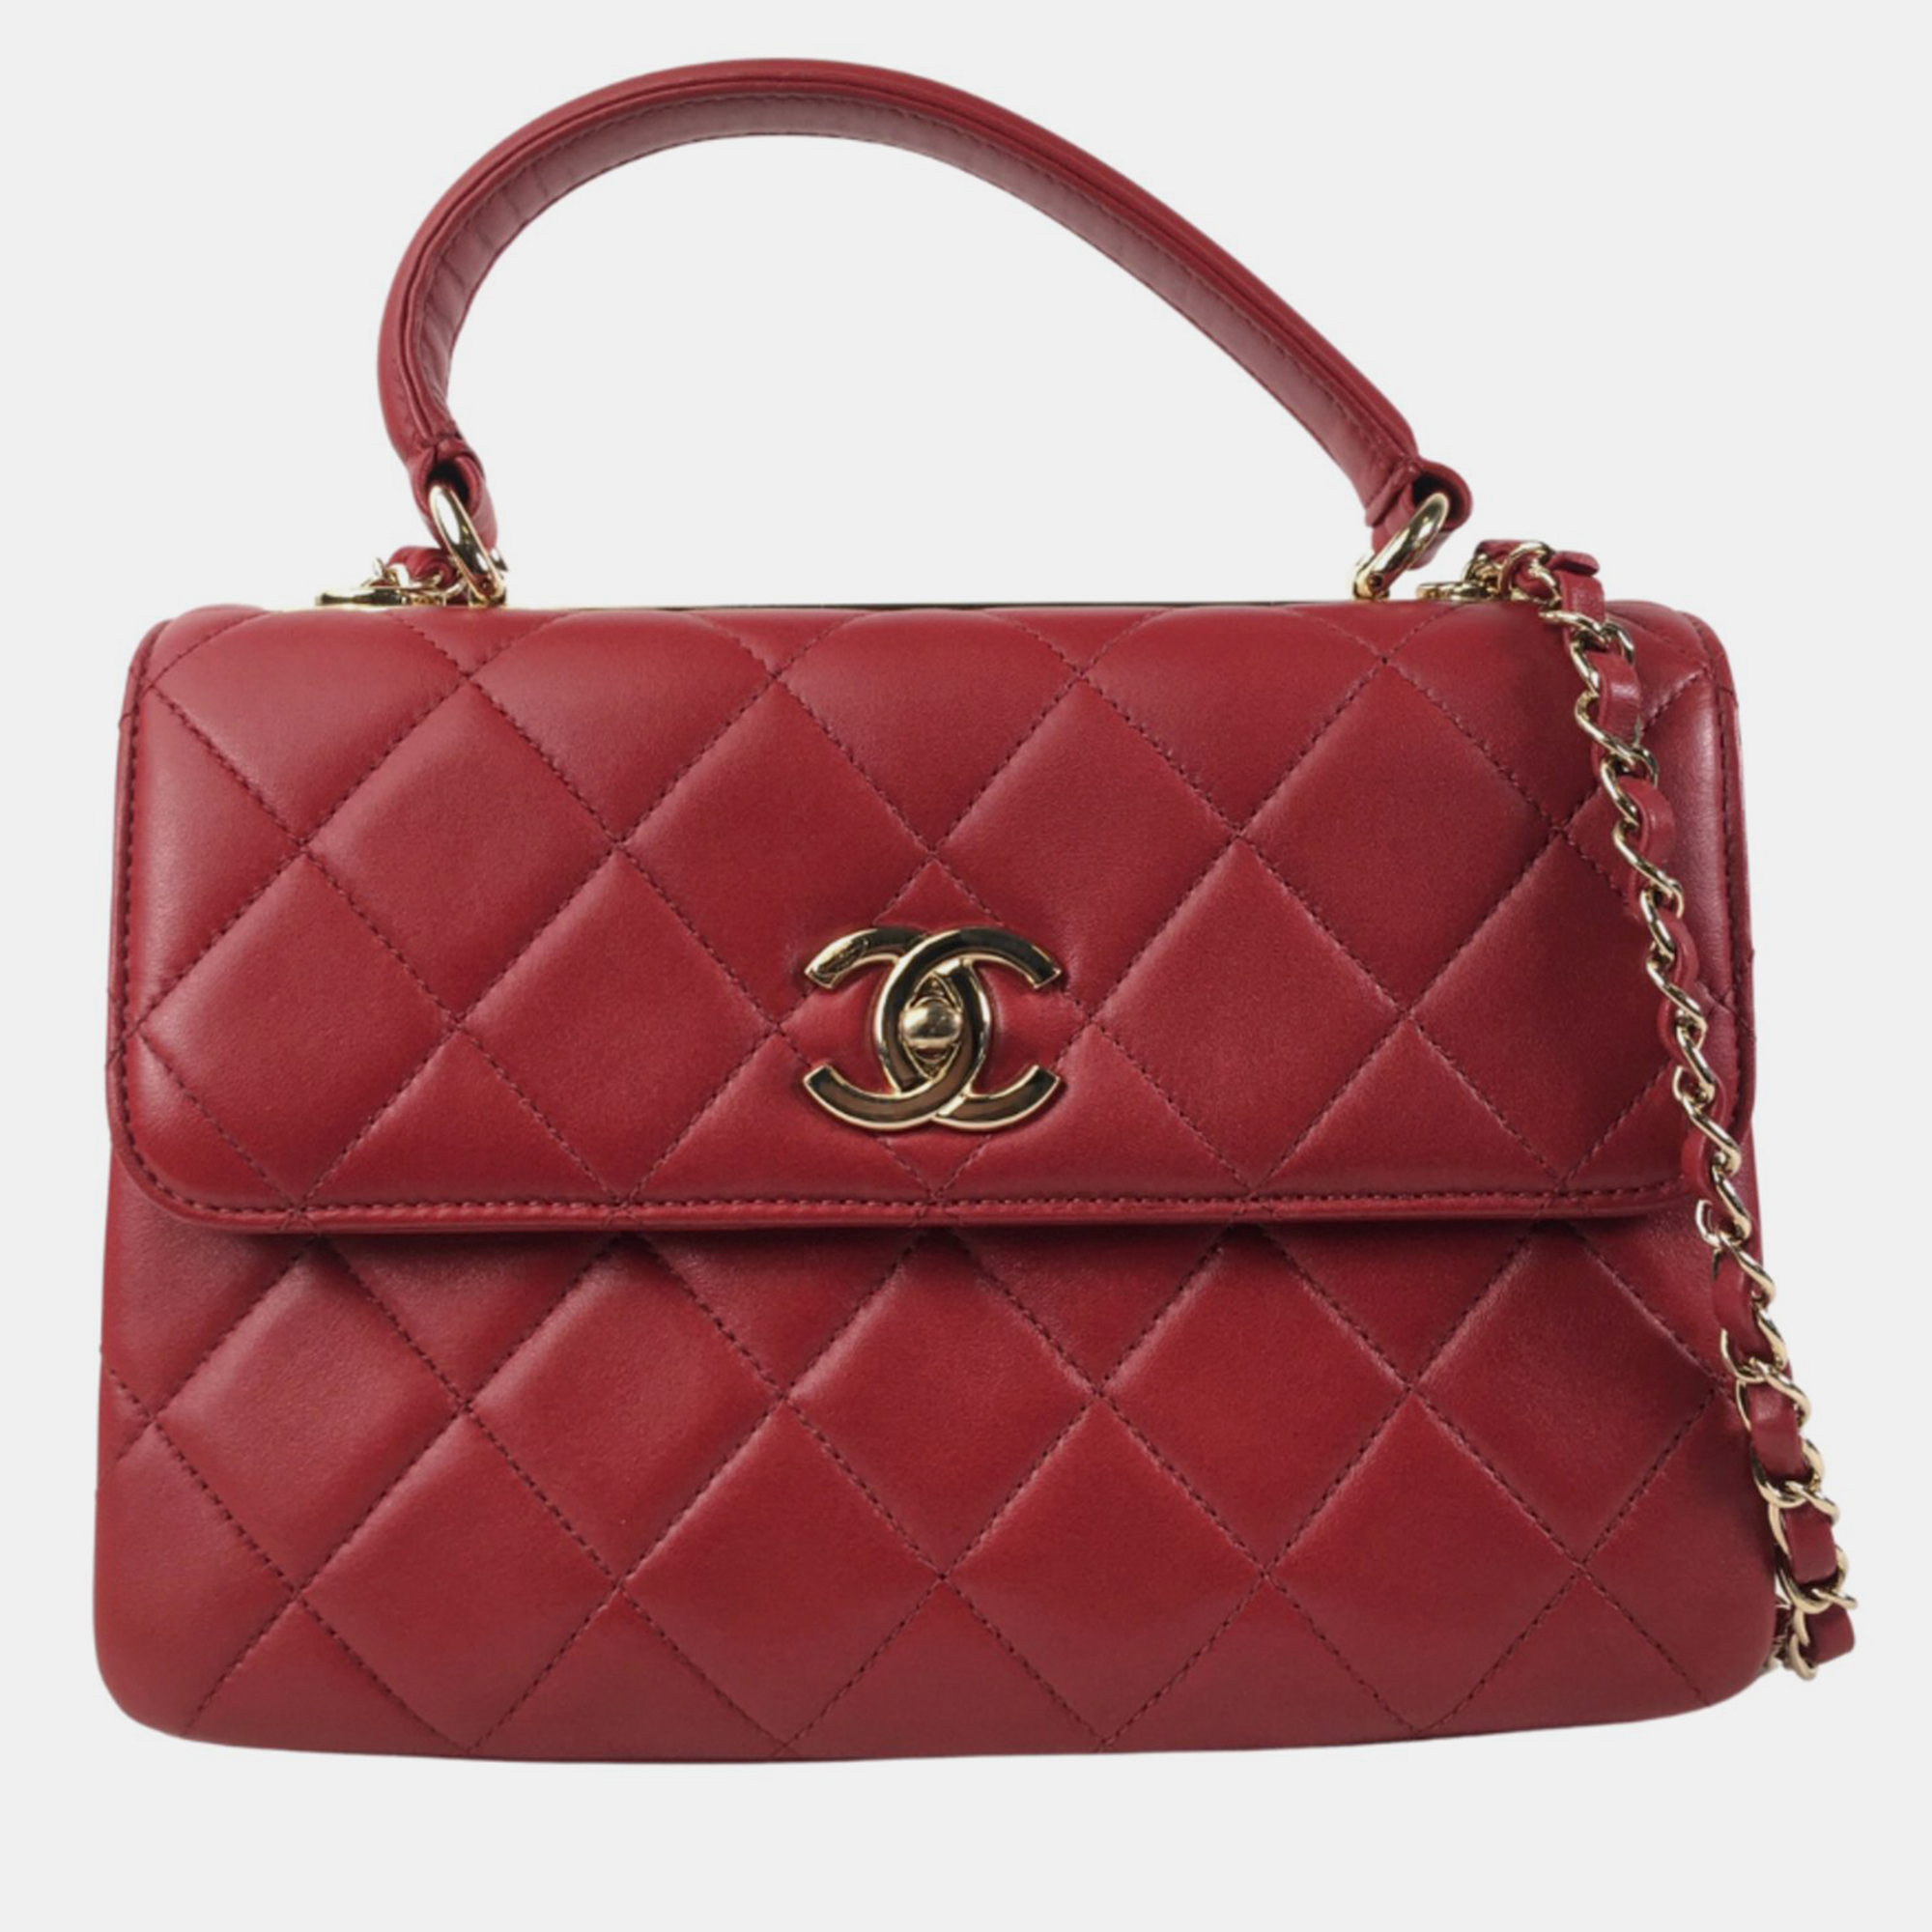 Chanel red leather small trendy cc top handle bags